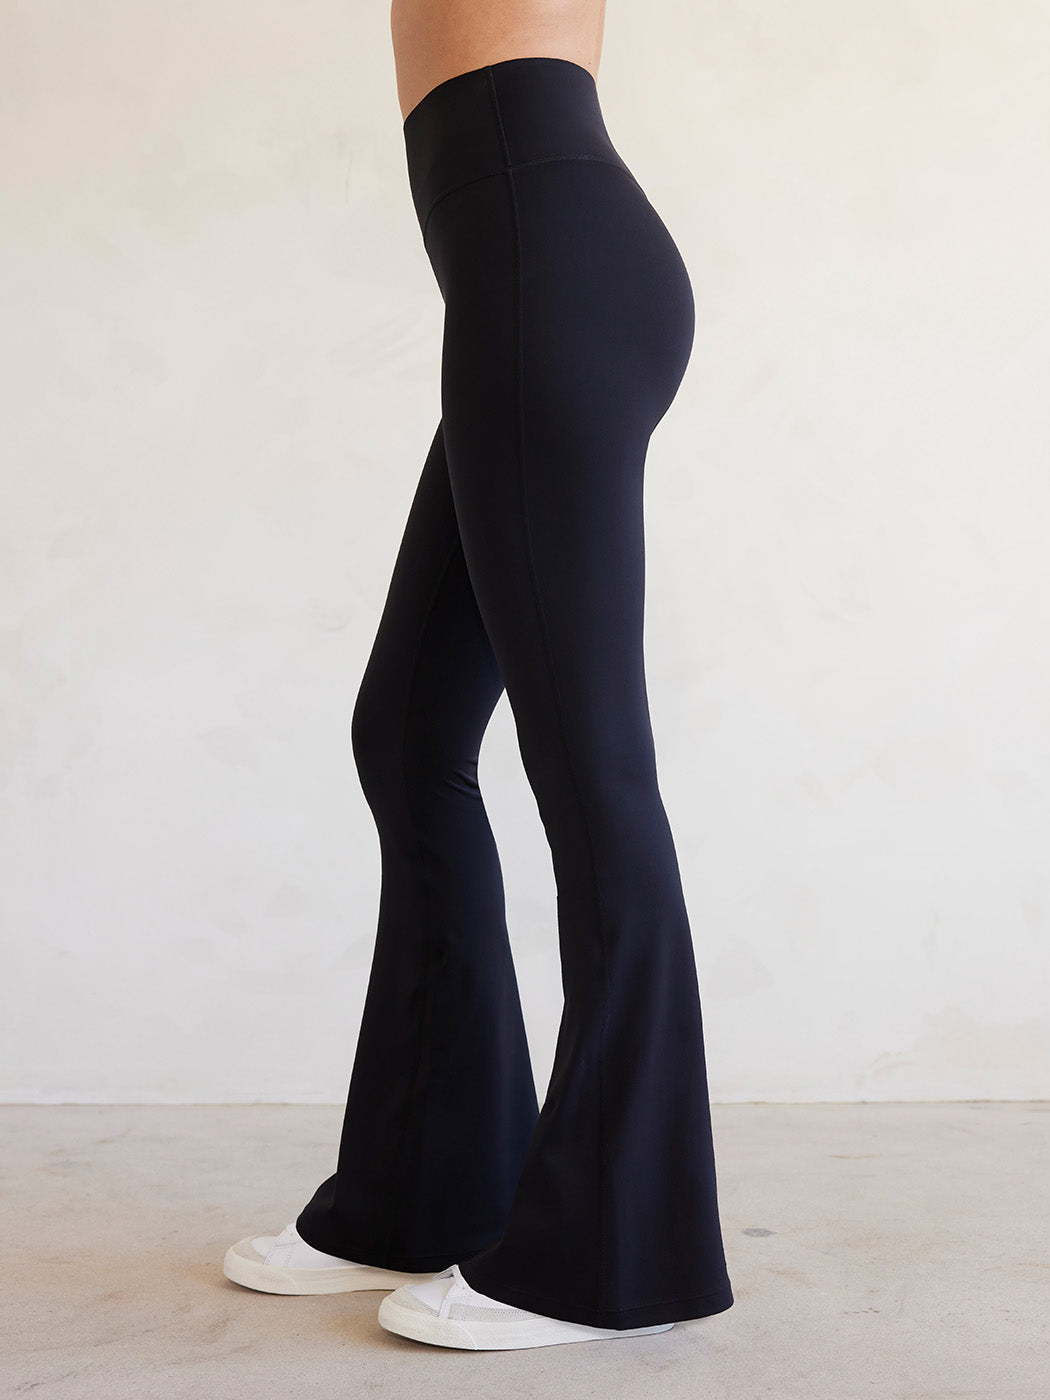 Carbon38 High Rise Flare Pants In Diamond Compression - Black | Ballet ...